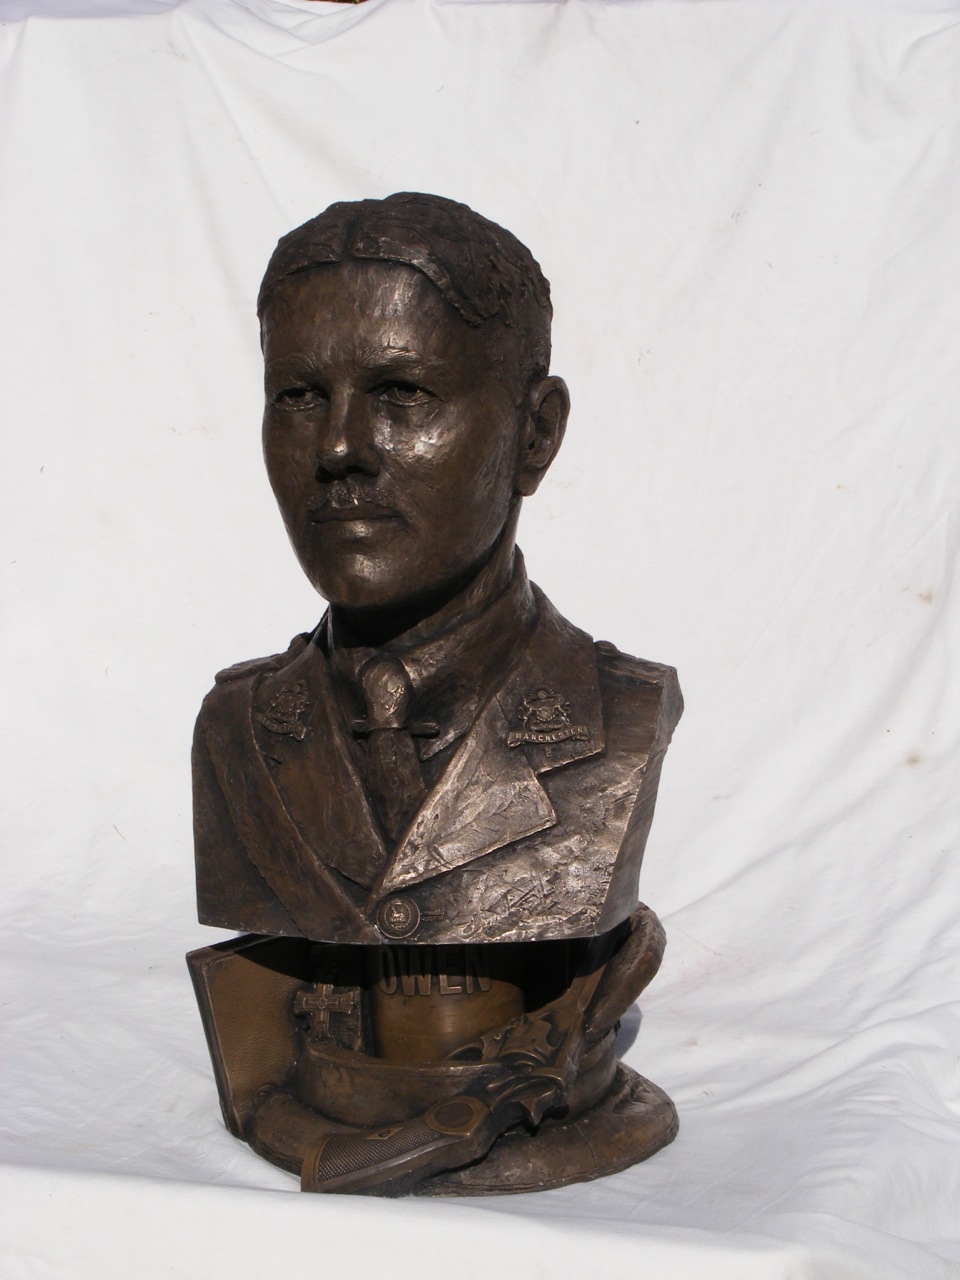 Image of a sculpture of Wilfred Owen